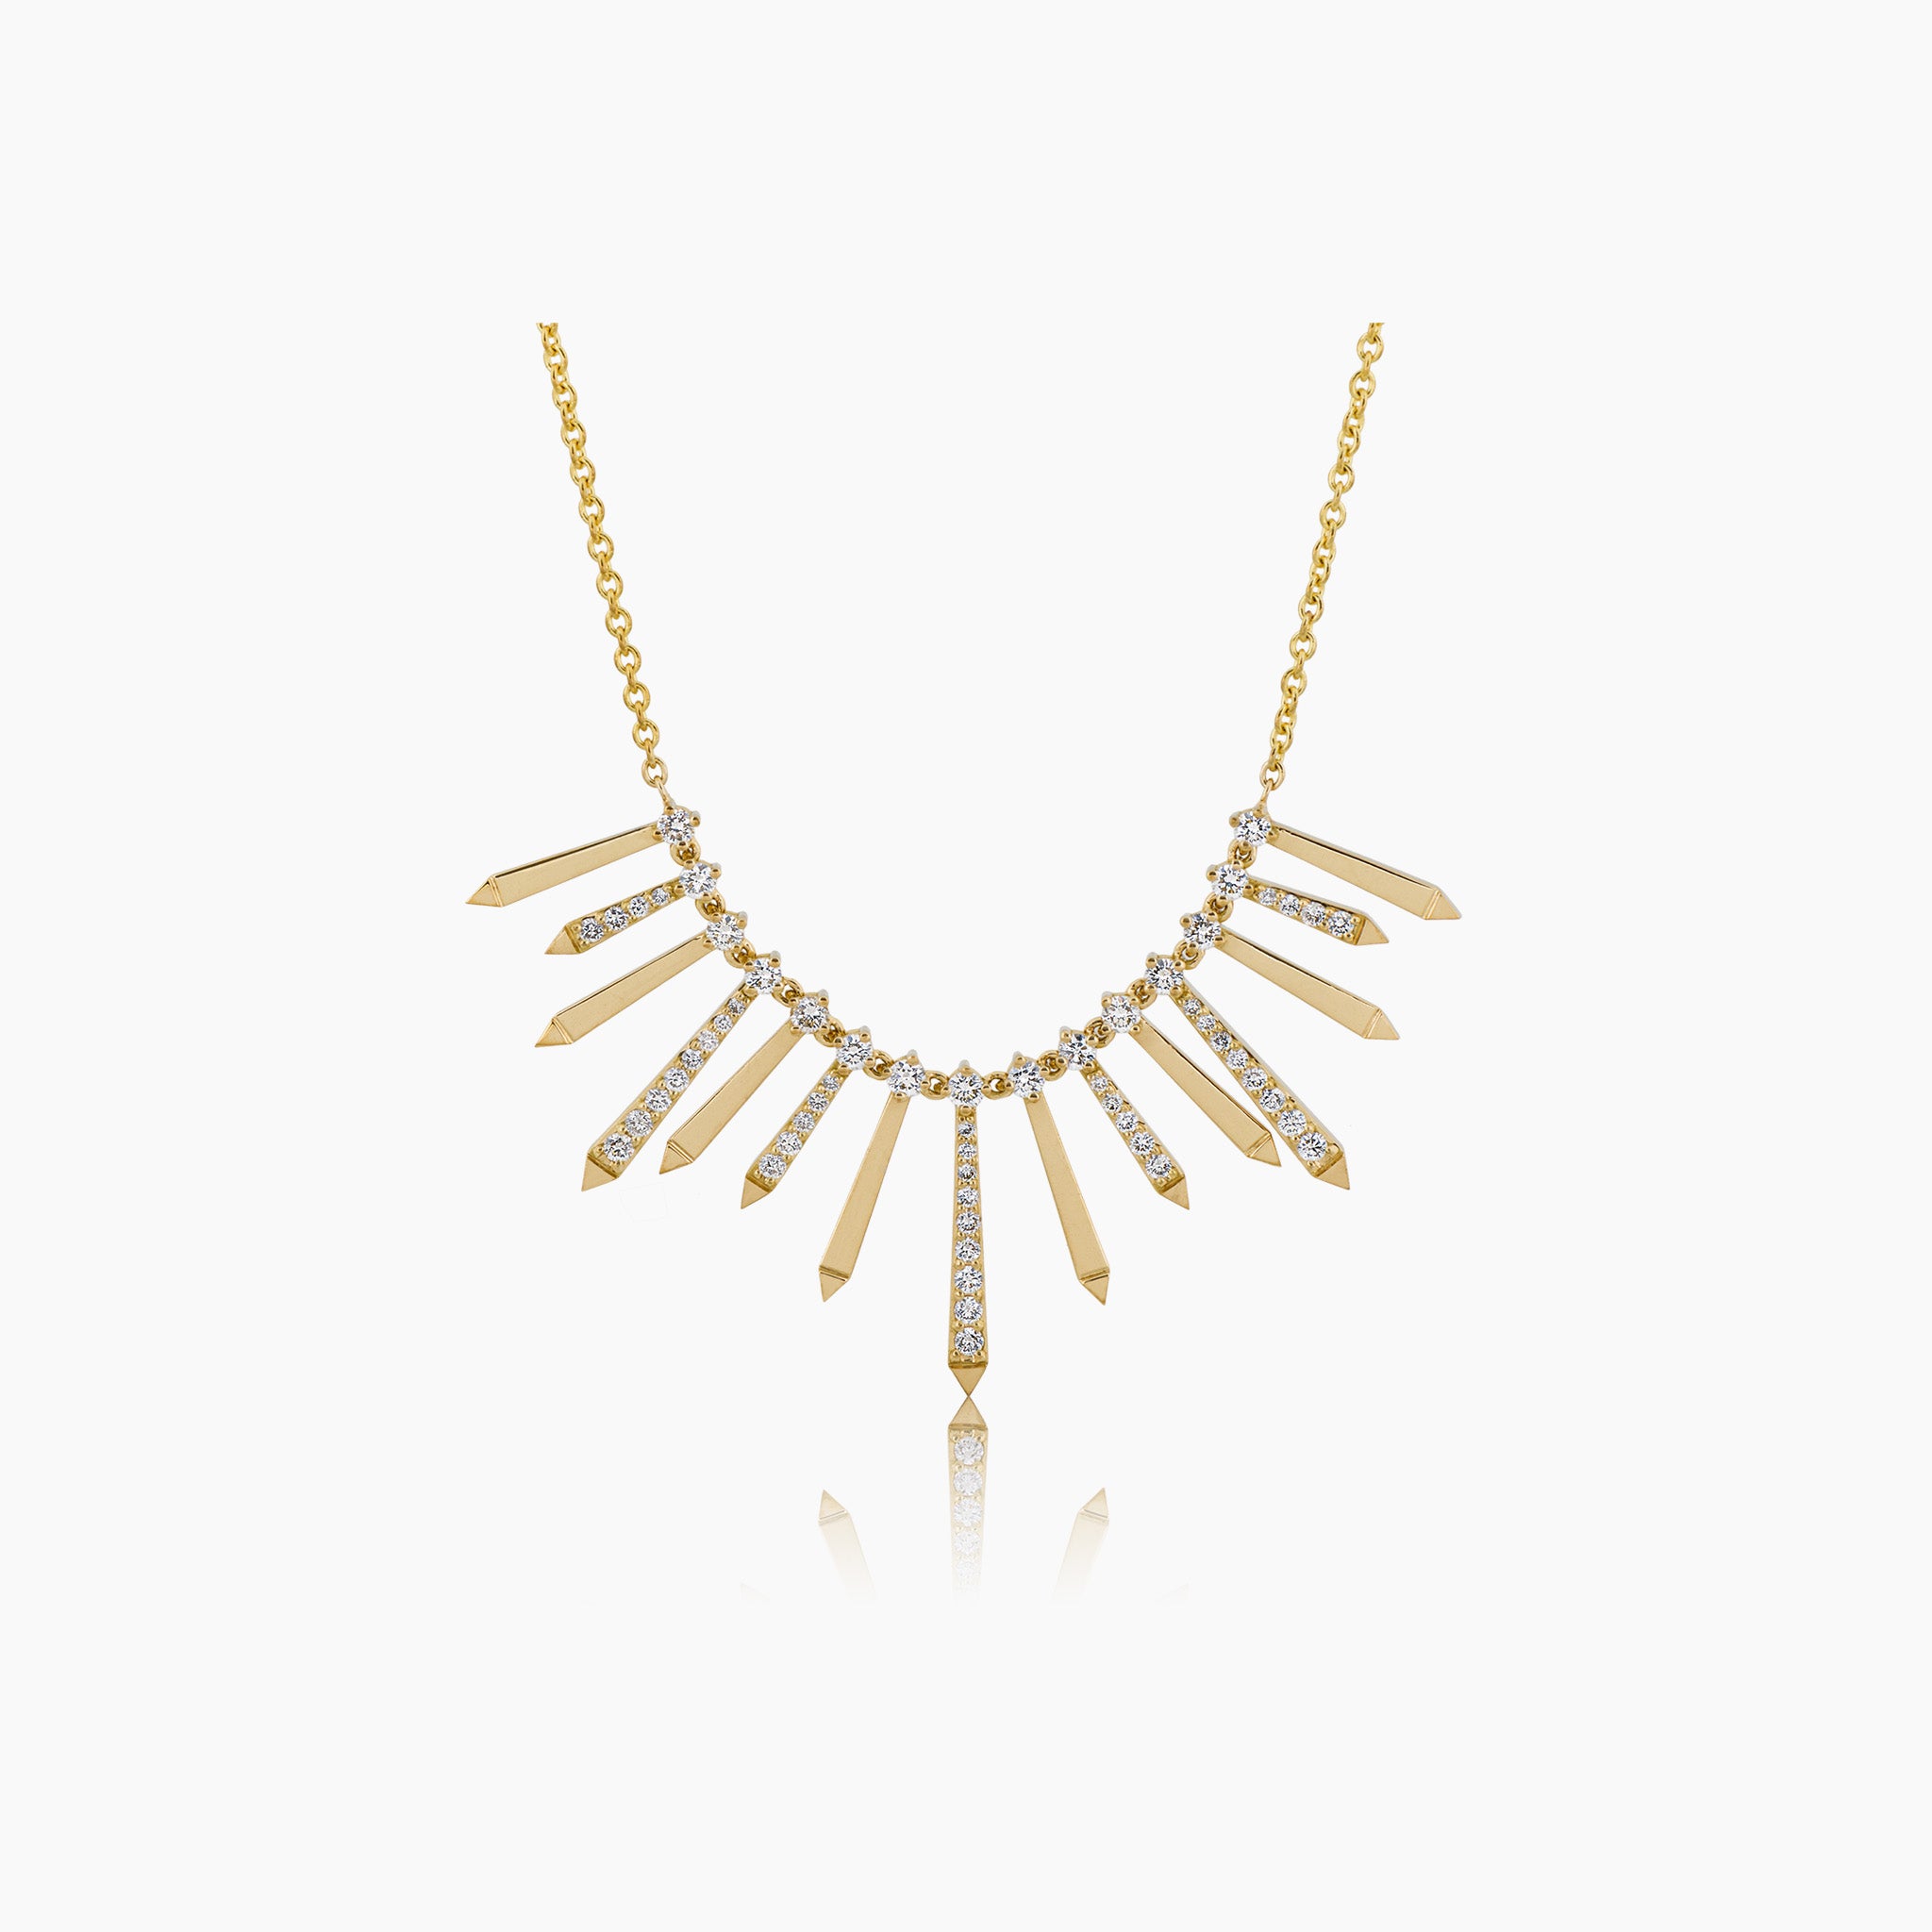 A radiant and sophisticated necklace crafted in gleaming yellow gold, adorned with dazzling diamonds, presented against an off-white background.